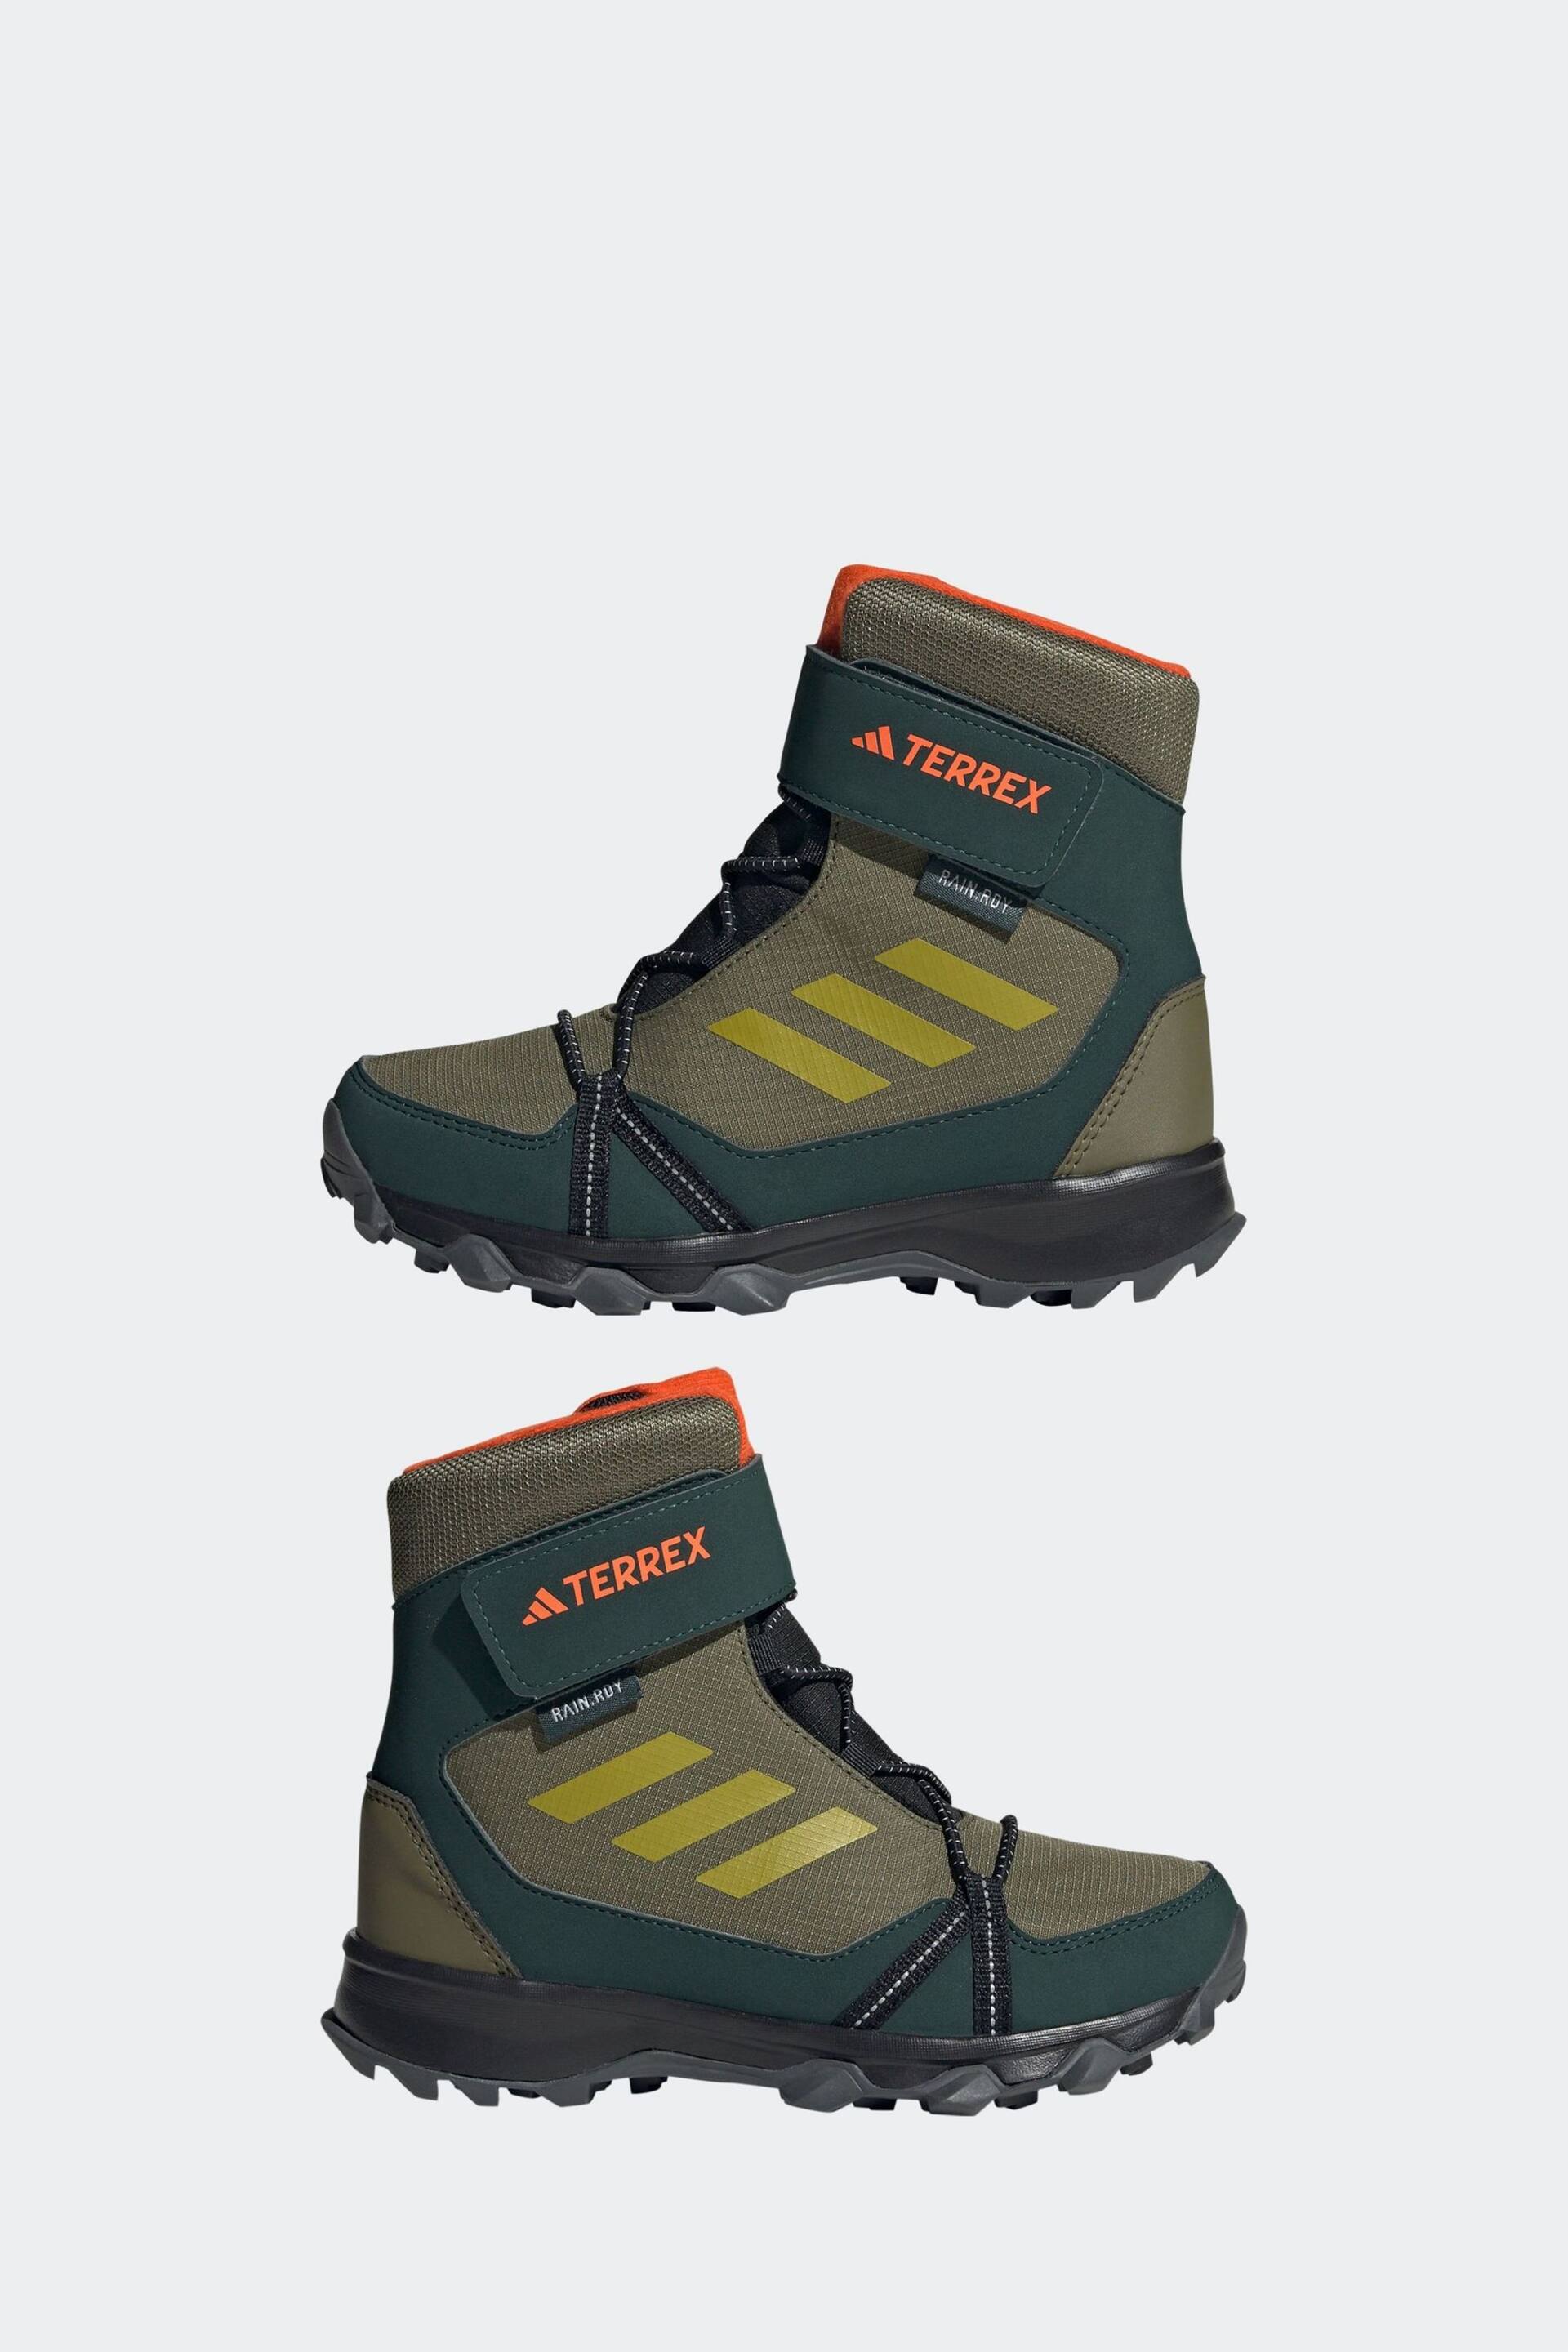 adidas Green Terrex Snow Hook-And-Loop Cold.Rdy Winter Boots - Image 5 of 9